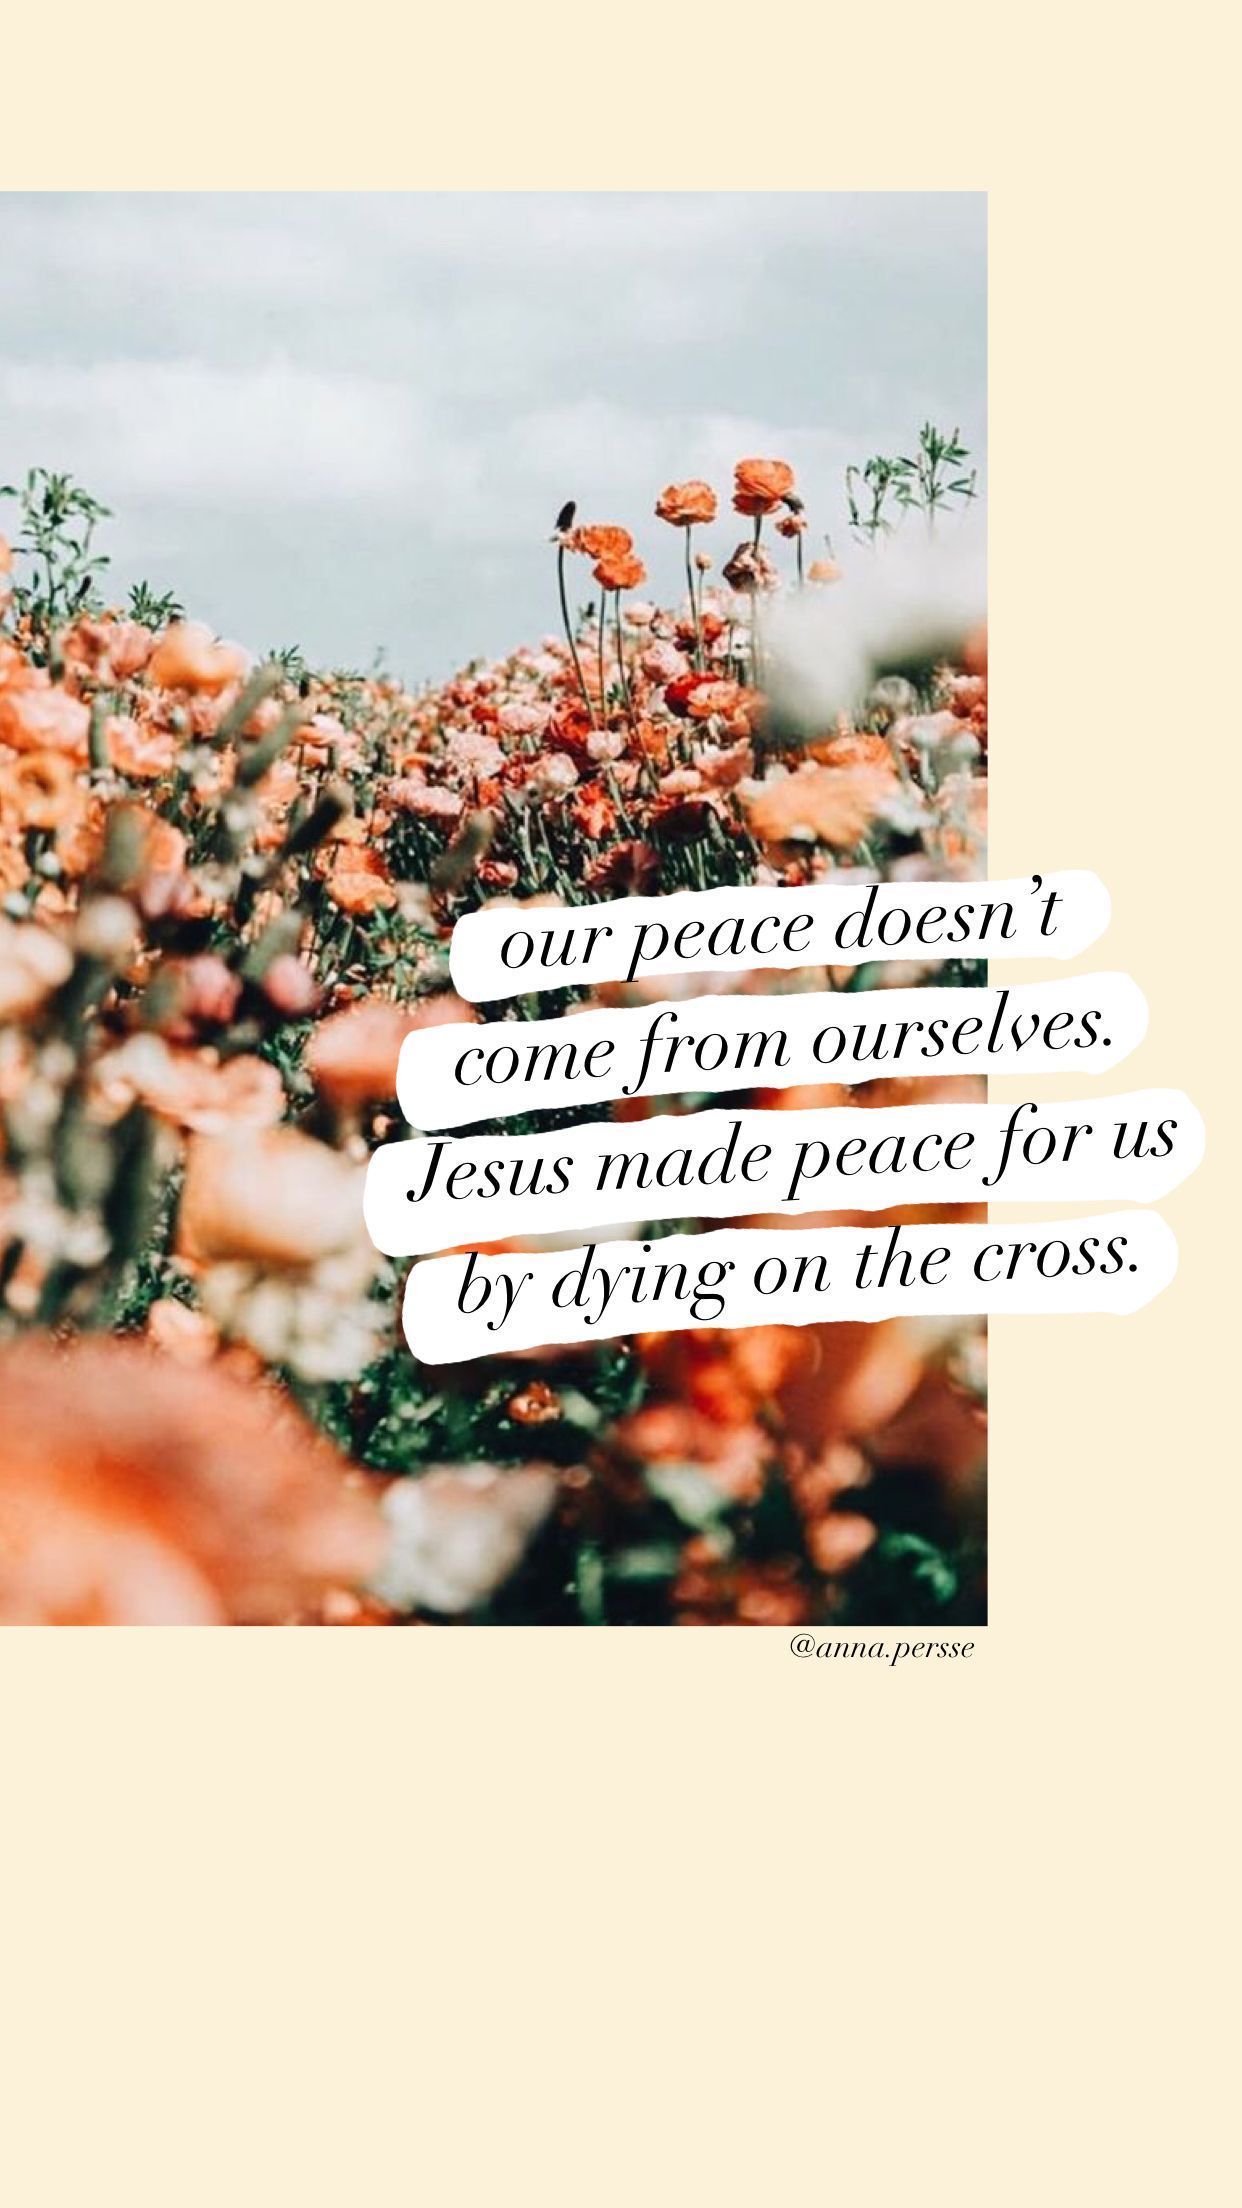 A quote from the bible with flowers in front of it - Jesus